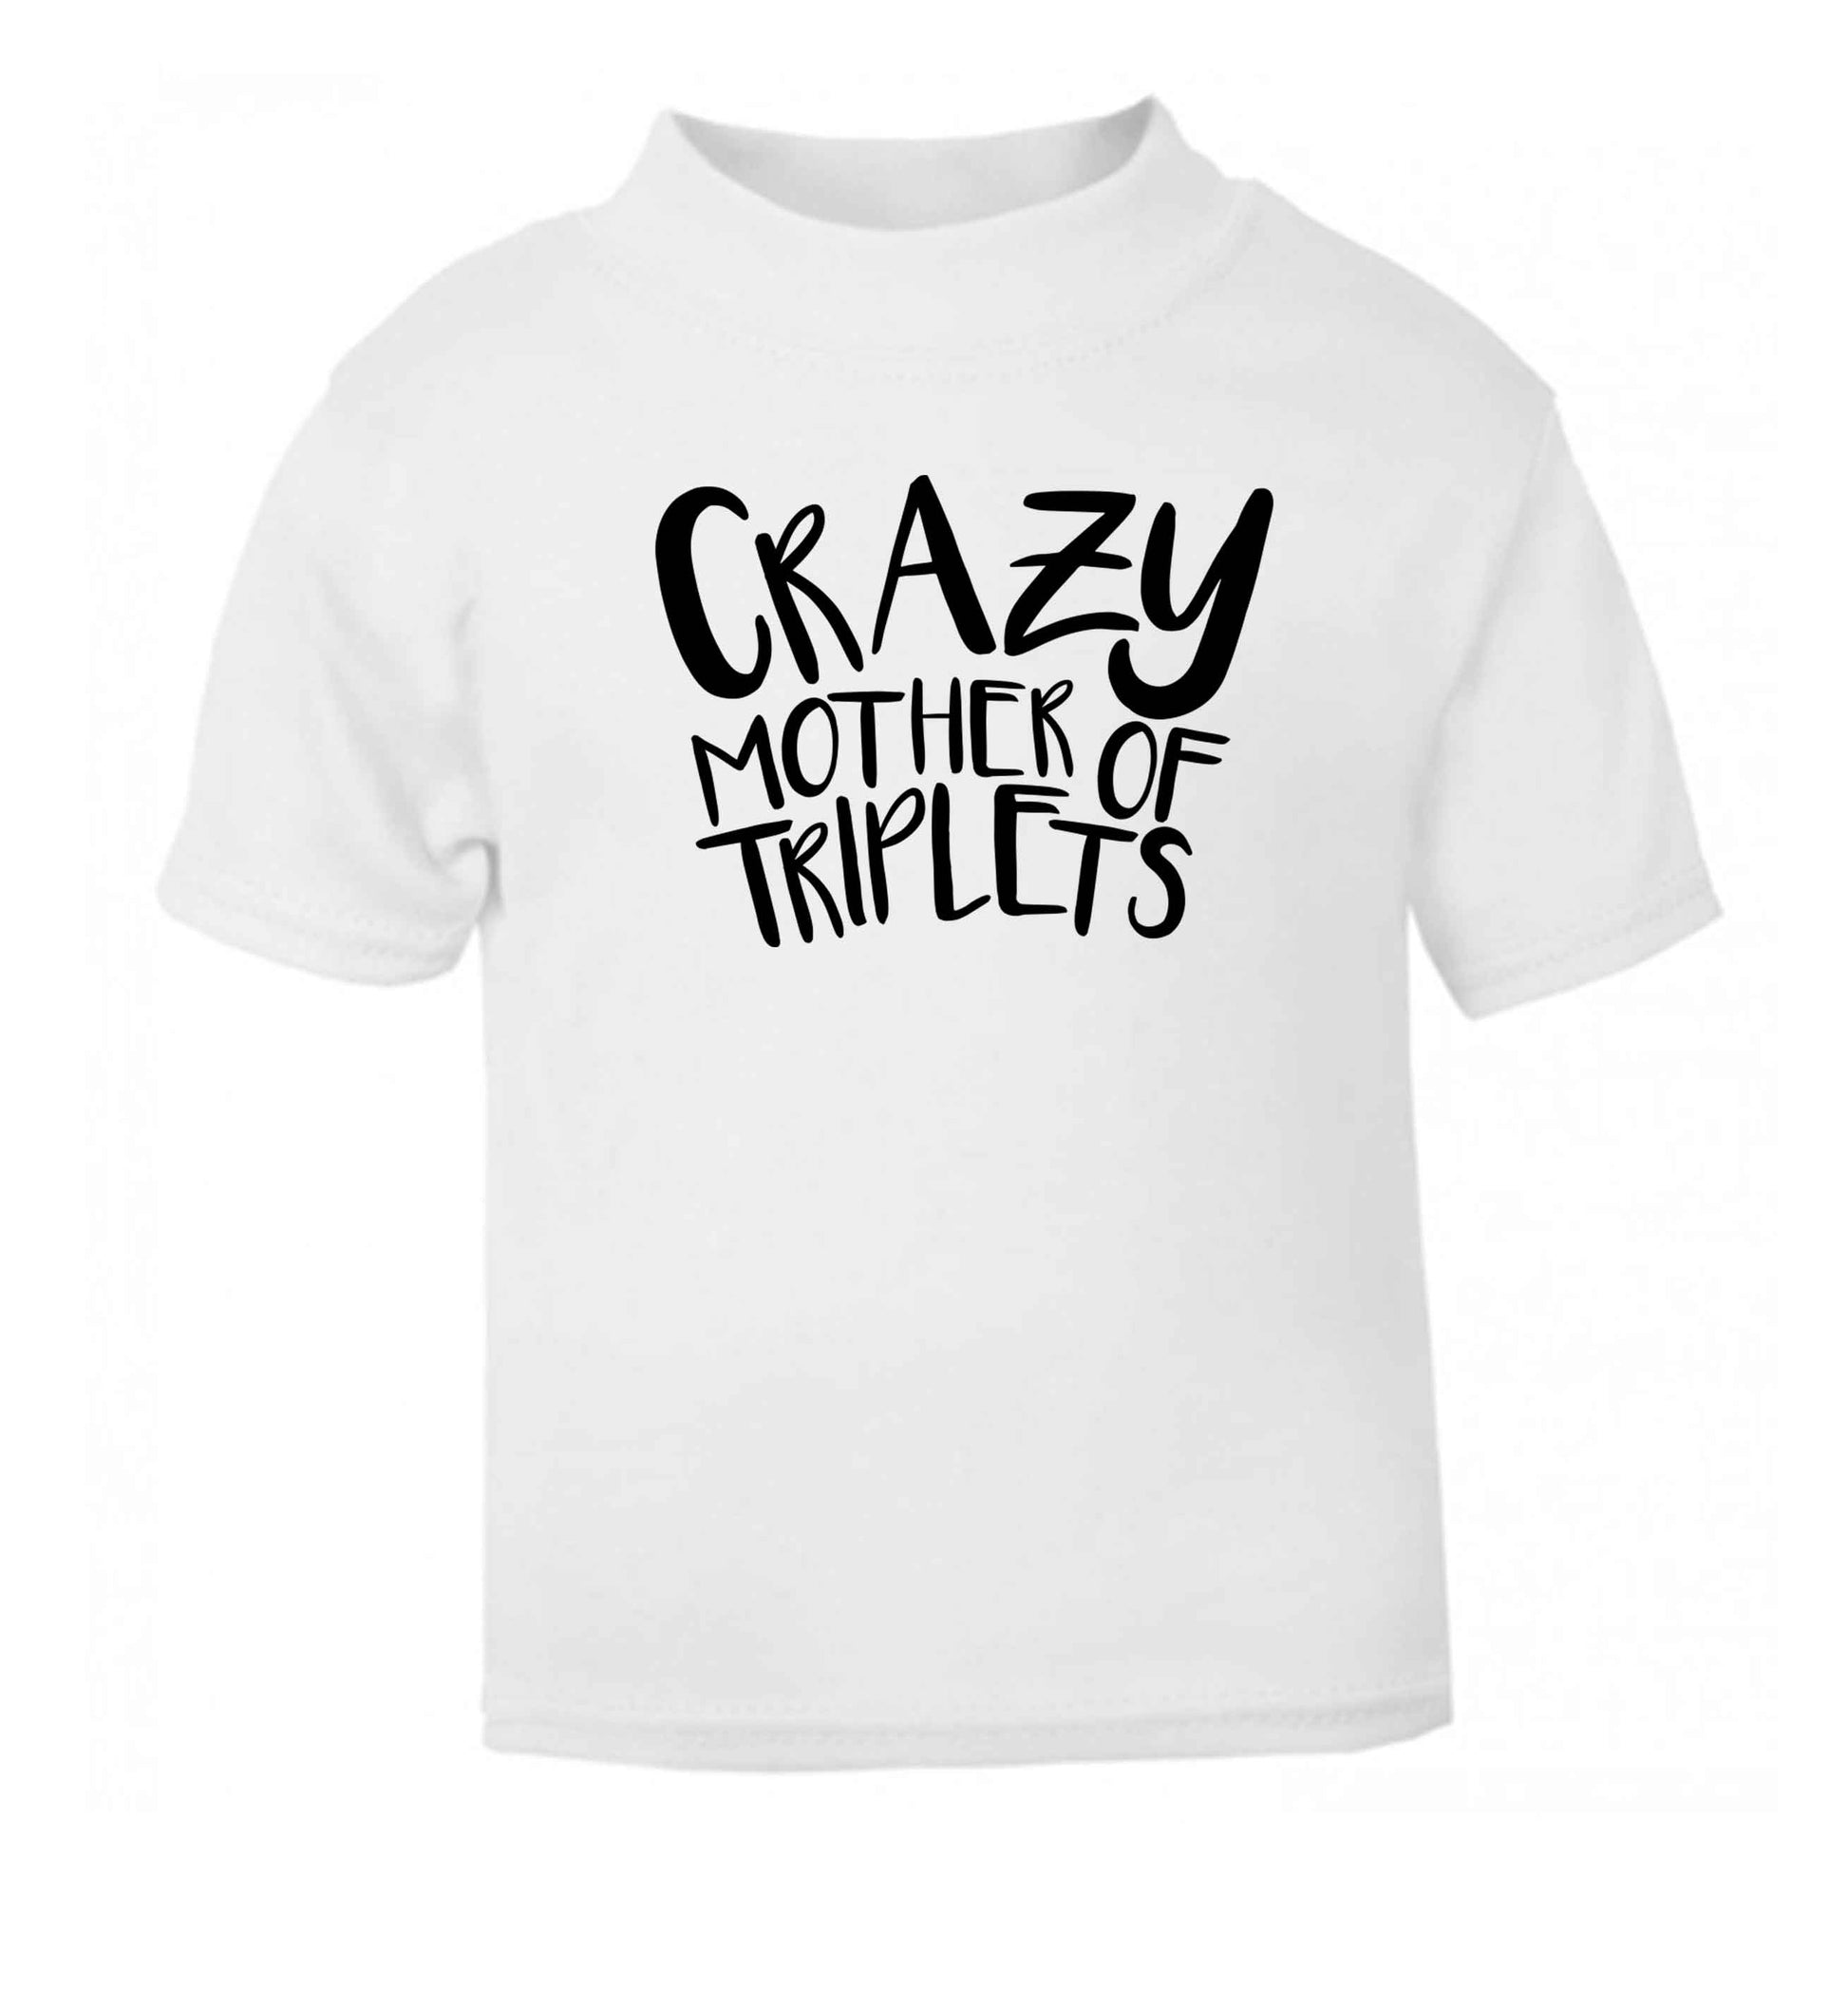 Crazy mother of triplets white baby toddler Tshirt 2 Years